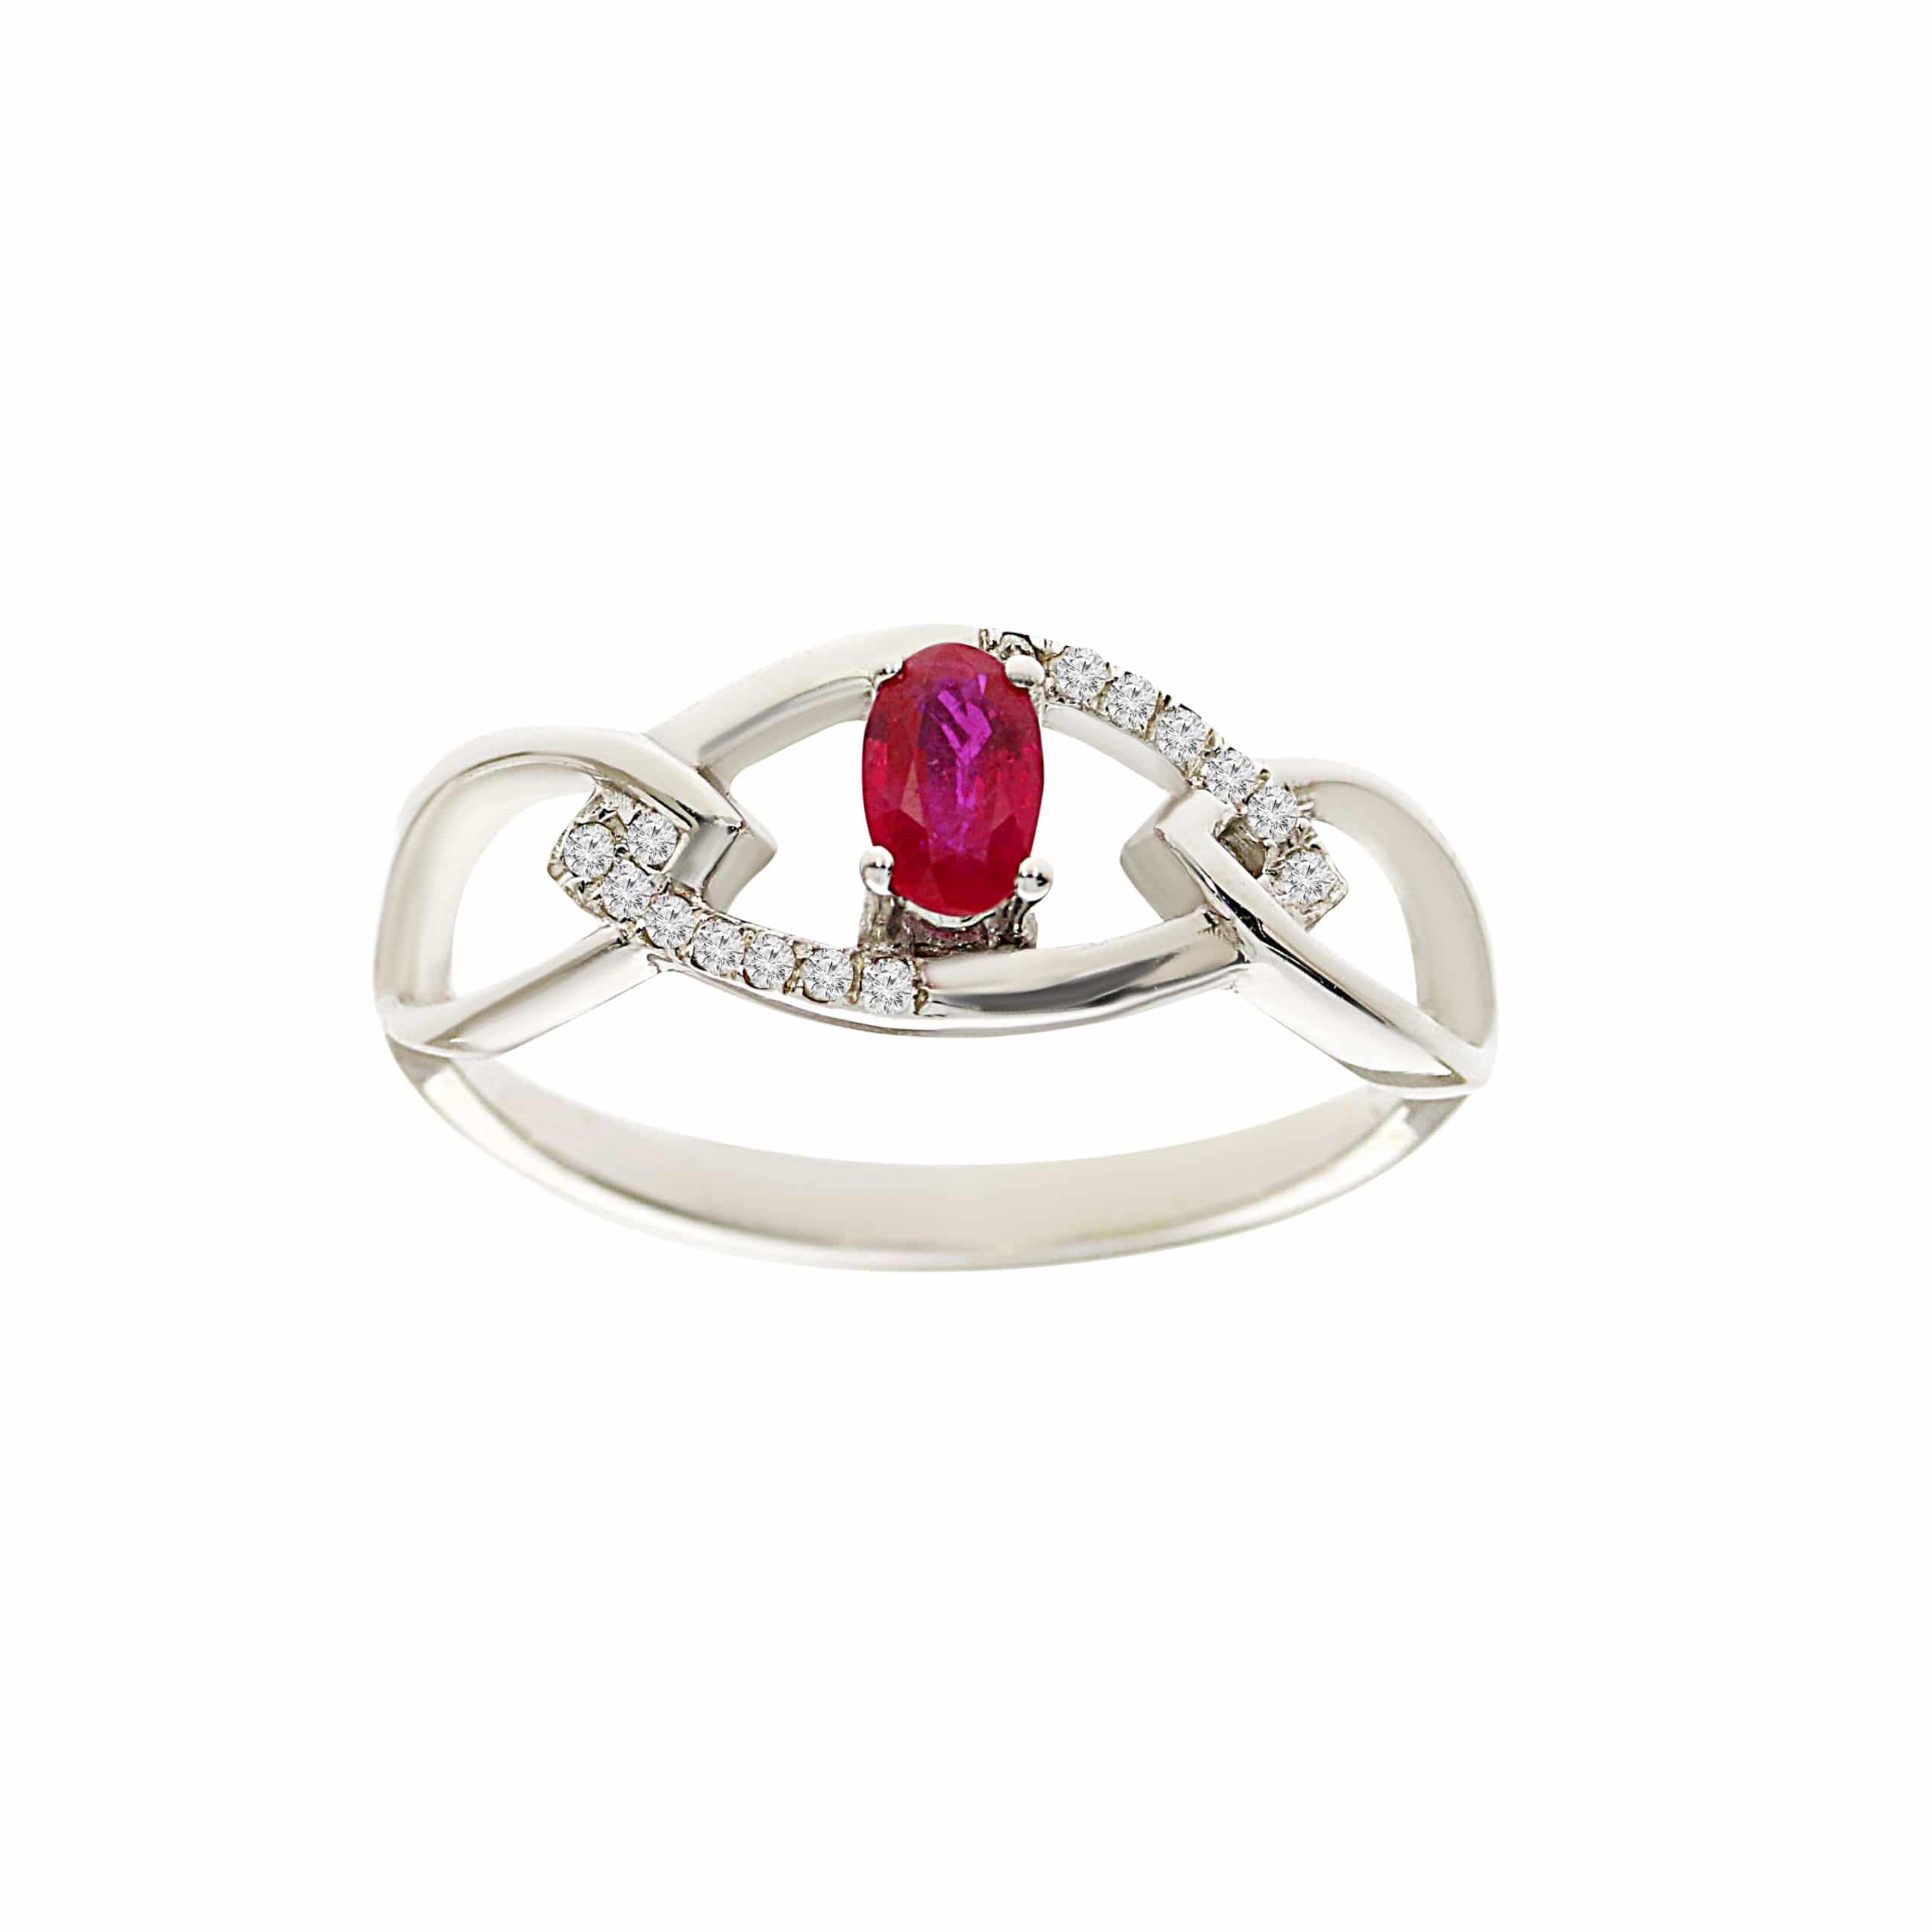 0.26ct Ruby and Diamonds Ring, 9K White Gold